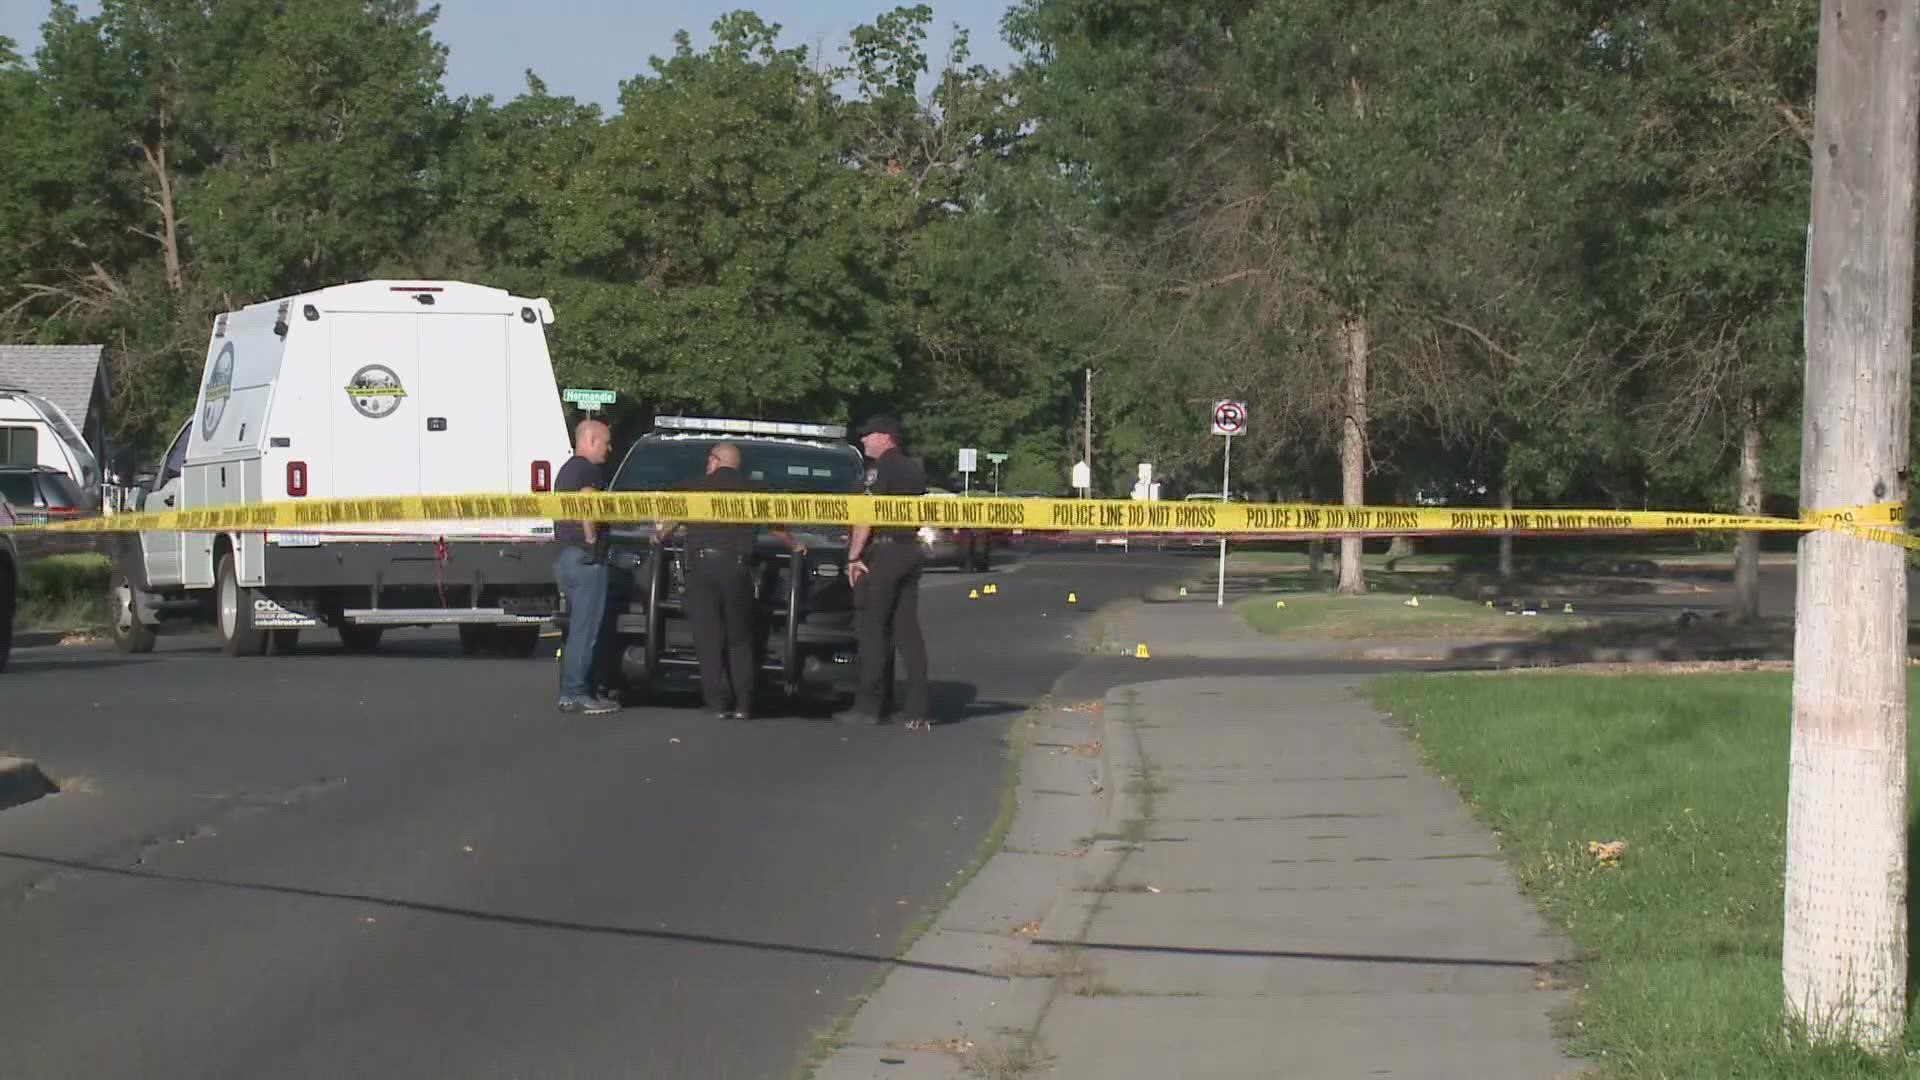 Spokane Police say the shooting took place near the playground at Franklin Park on Aug. 27. Officers arrived to find four people shot and one man who was dead.